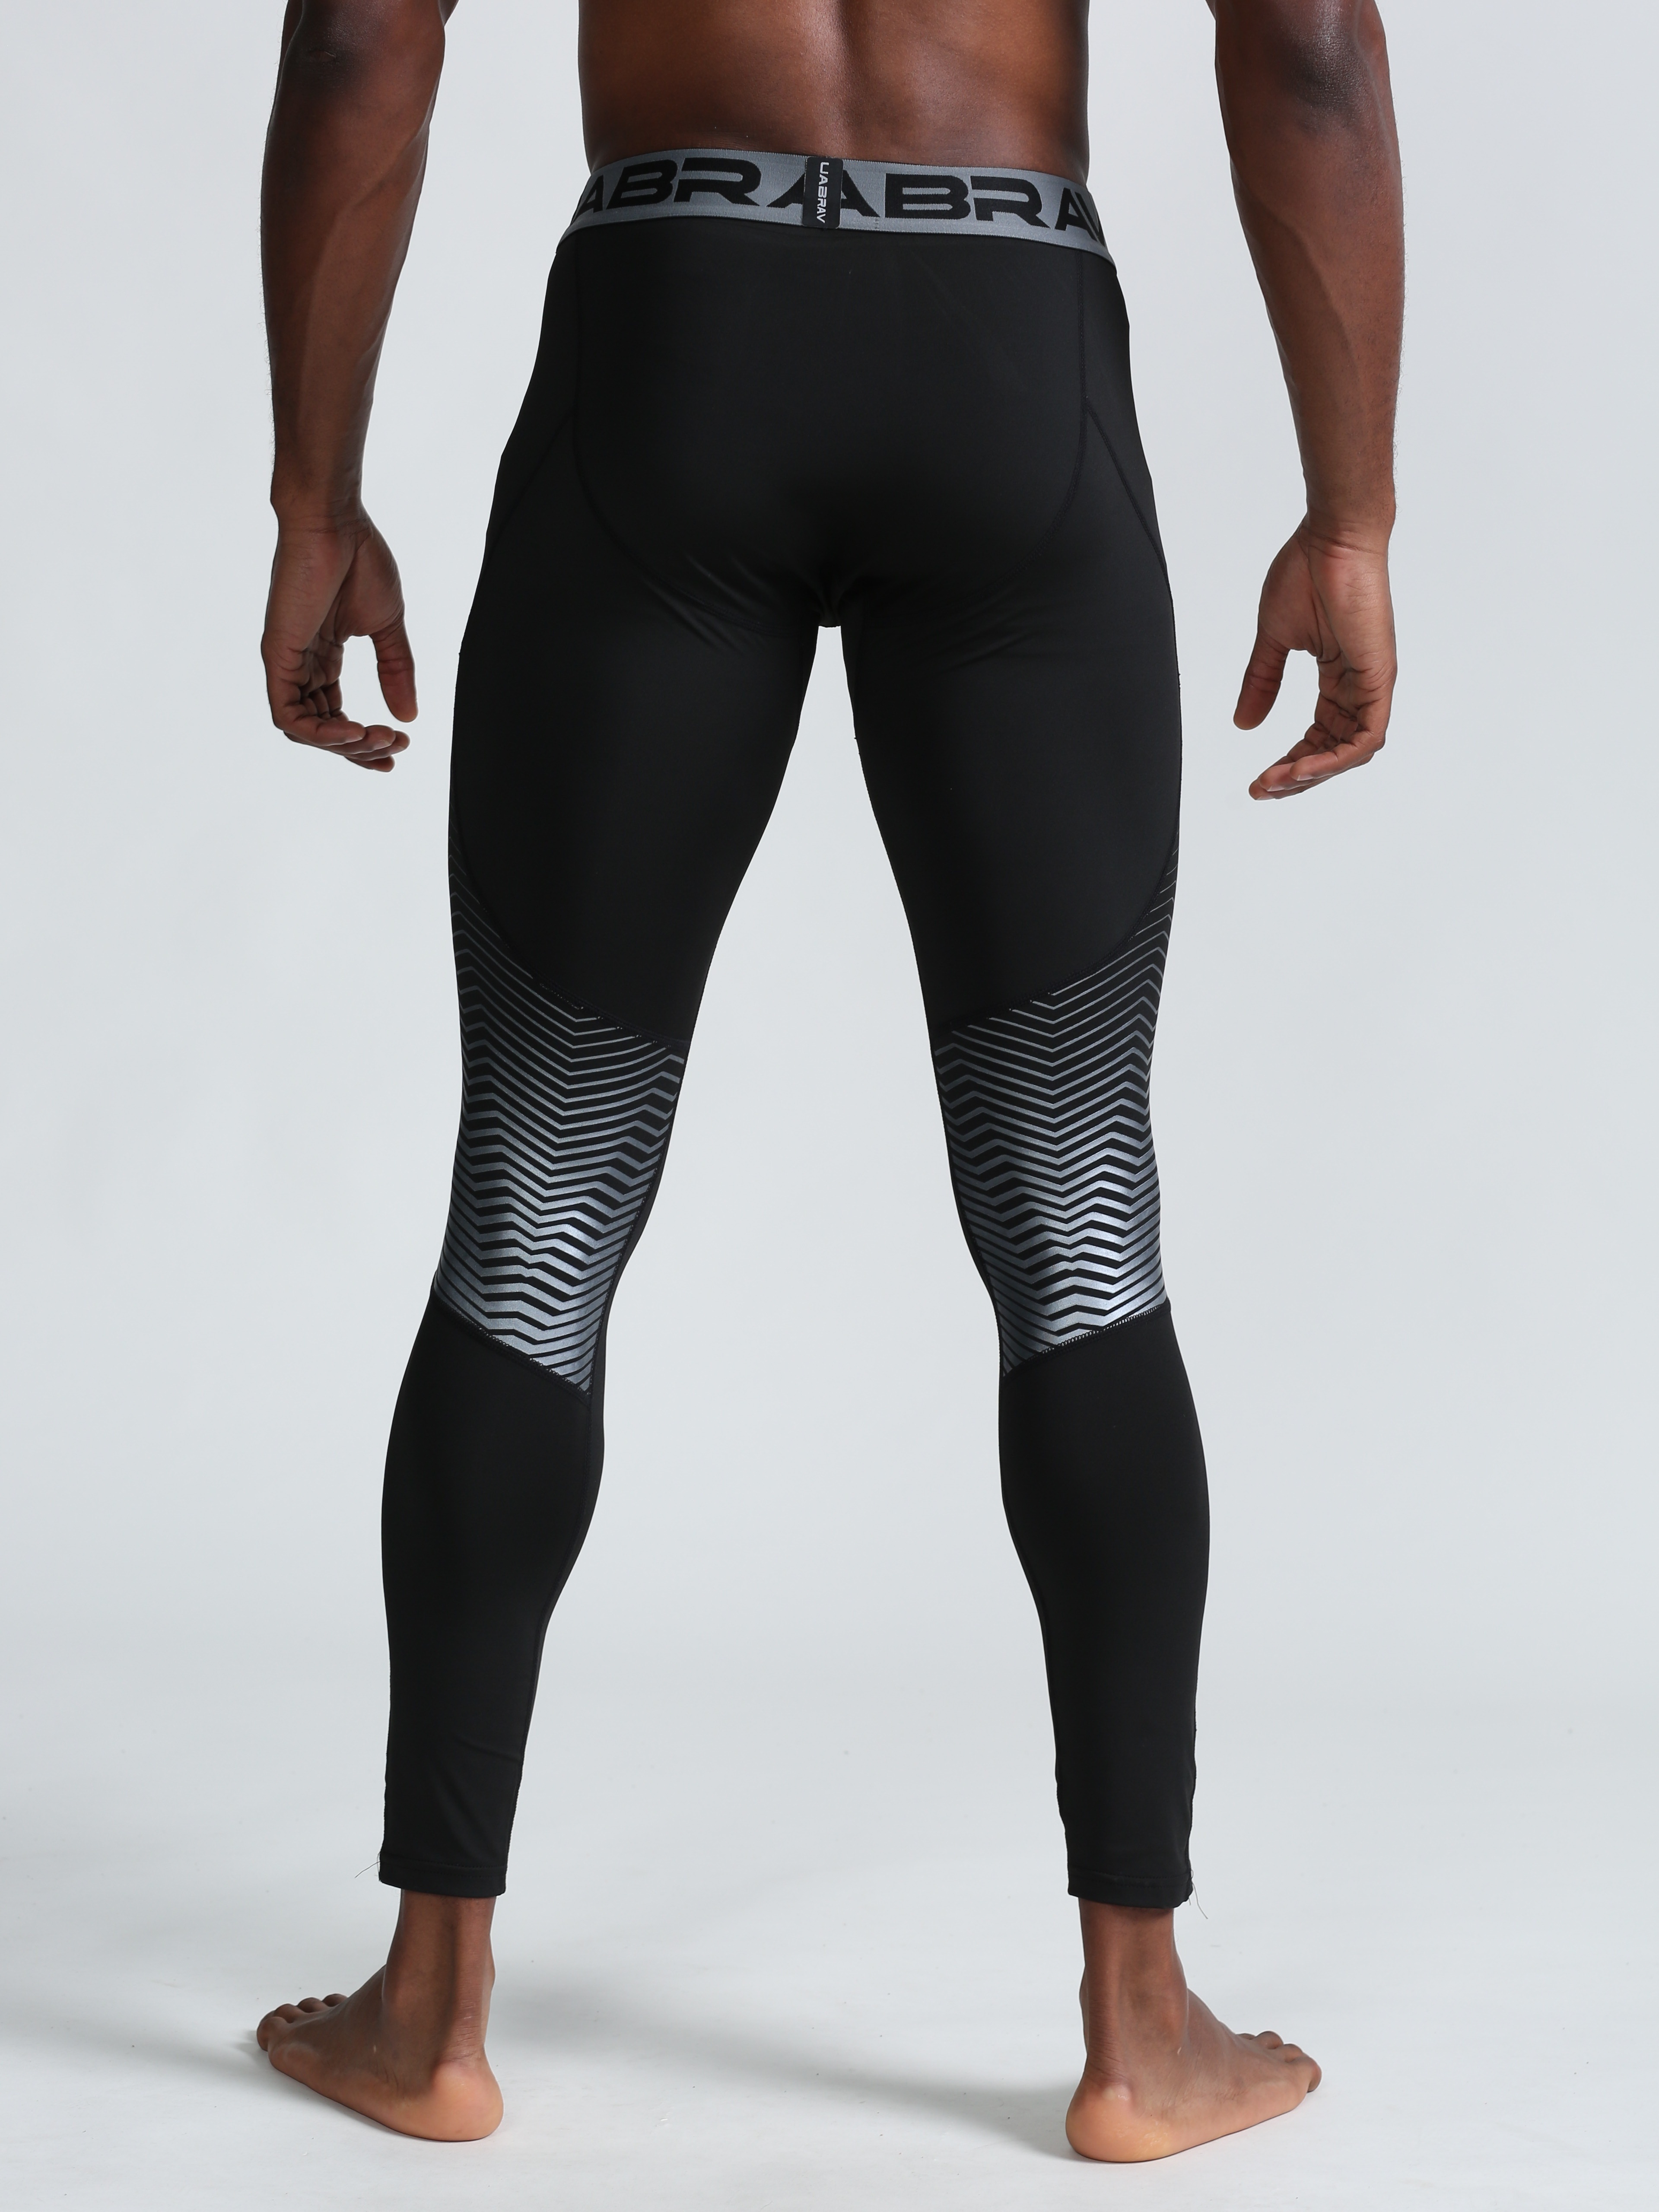 Men's Compression Pants, Basketball Training Running Tights Workout Leggings